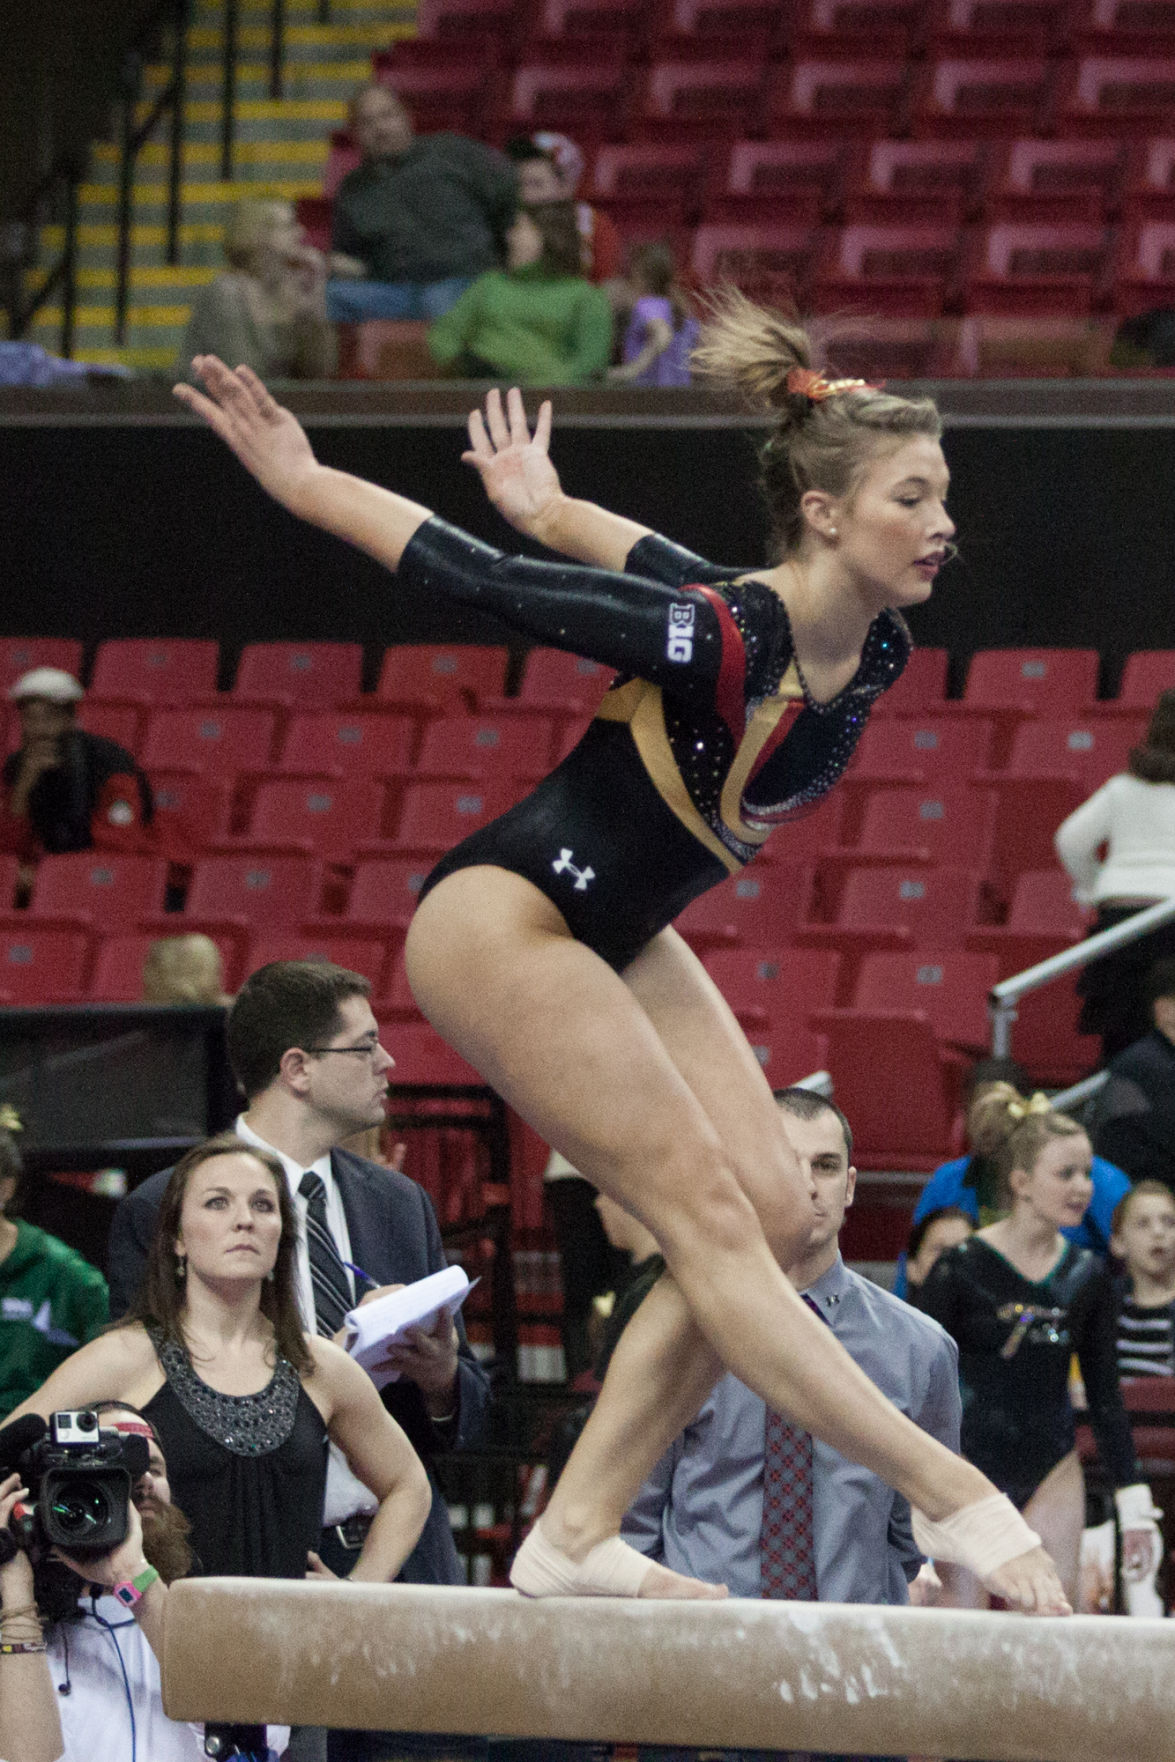 Utah will open the NCAA Gymnastics Championships on balance beam. That poses  some challenges.